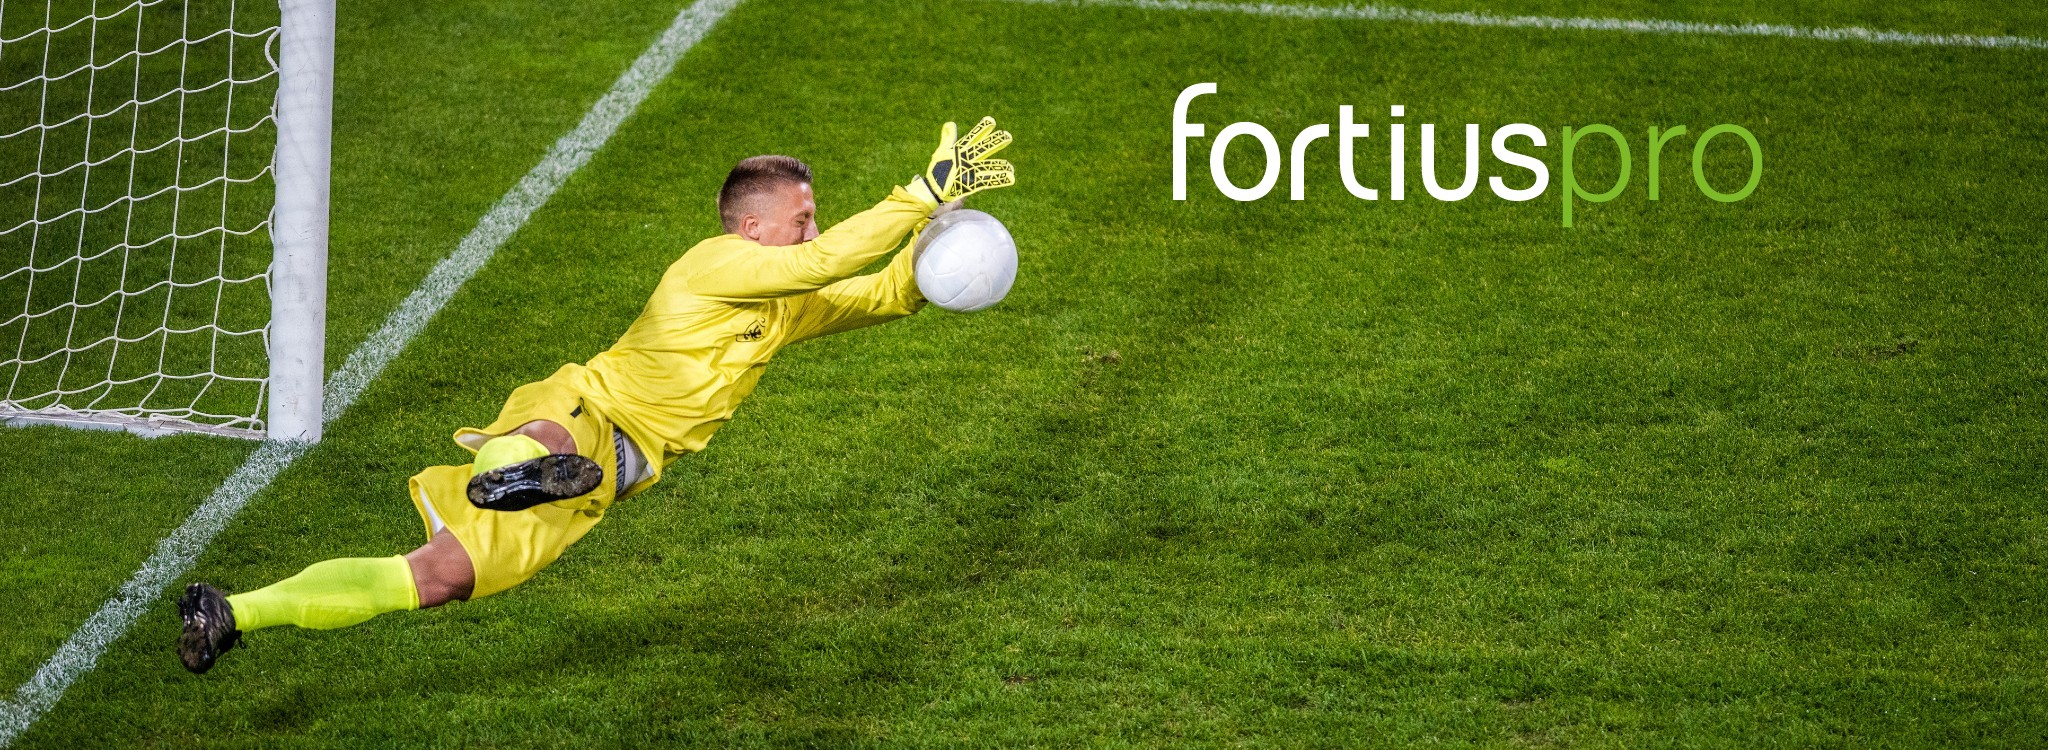 Fortius Pro - Managed Medical services for Sports clubs, Organizations and  Athletes